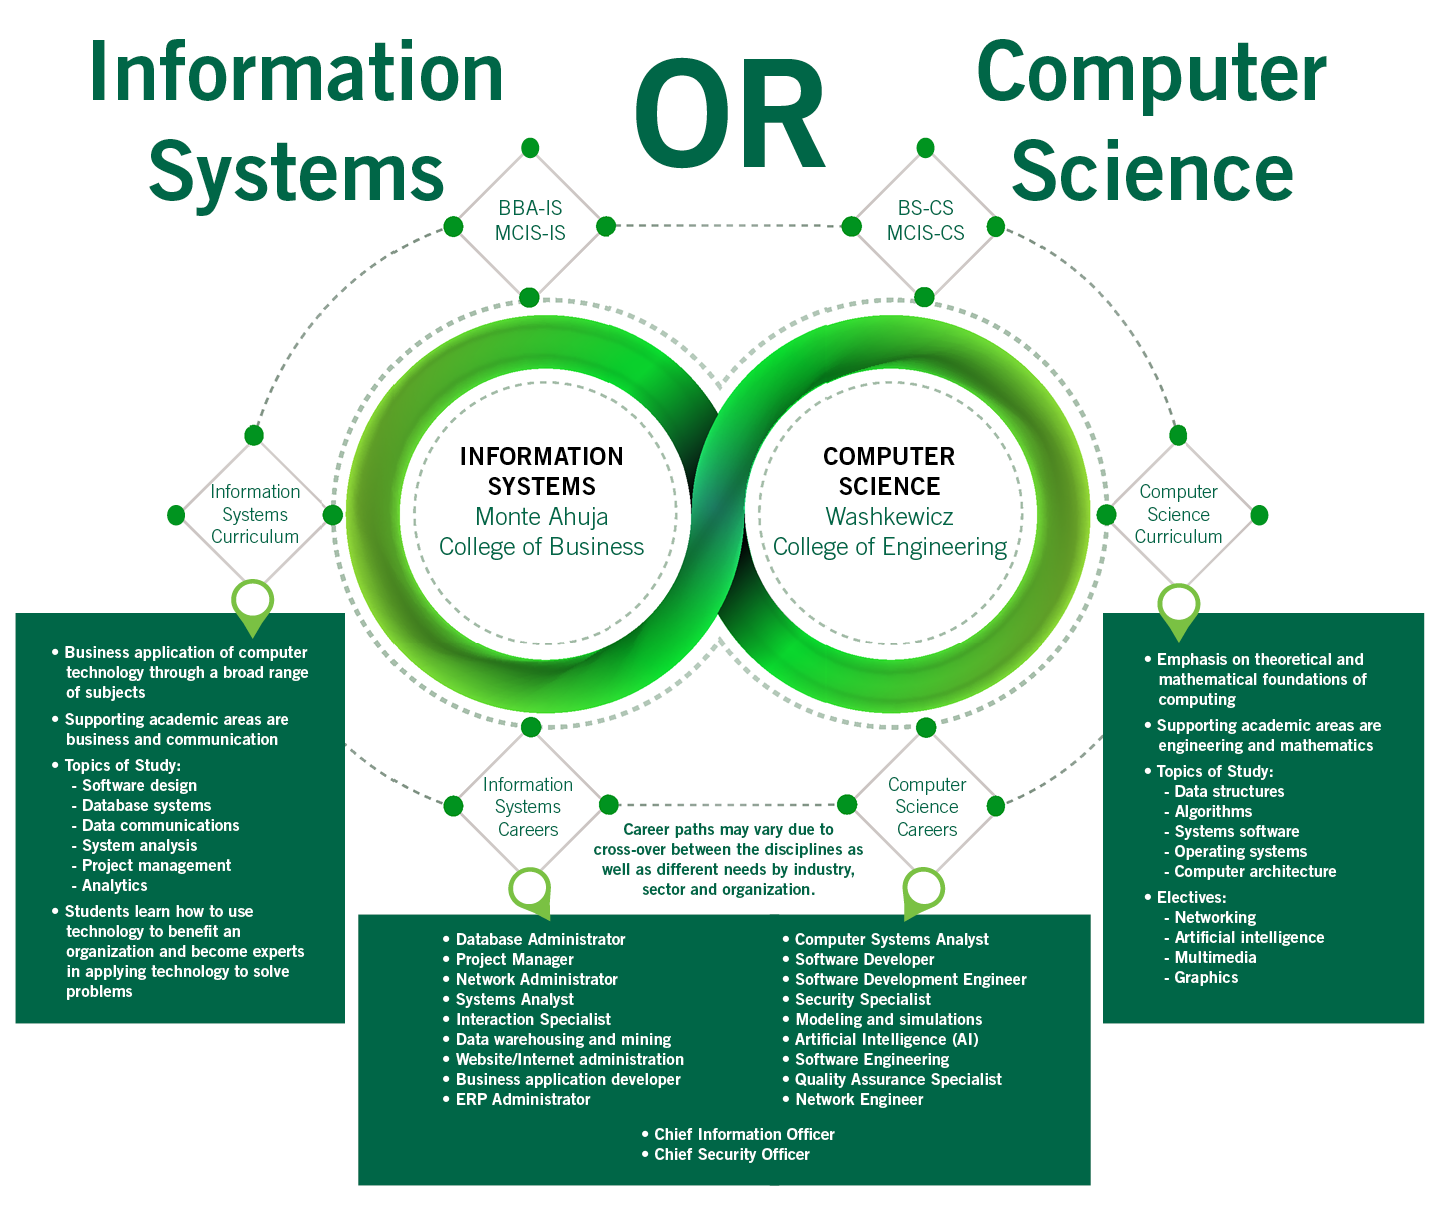 Computer Science & Information Systems and Technology | Cleveland State